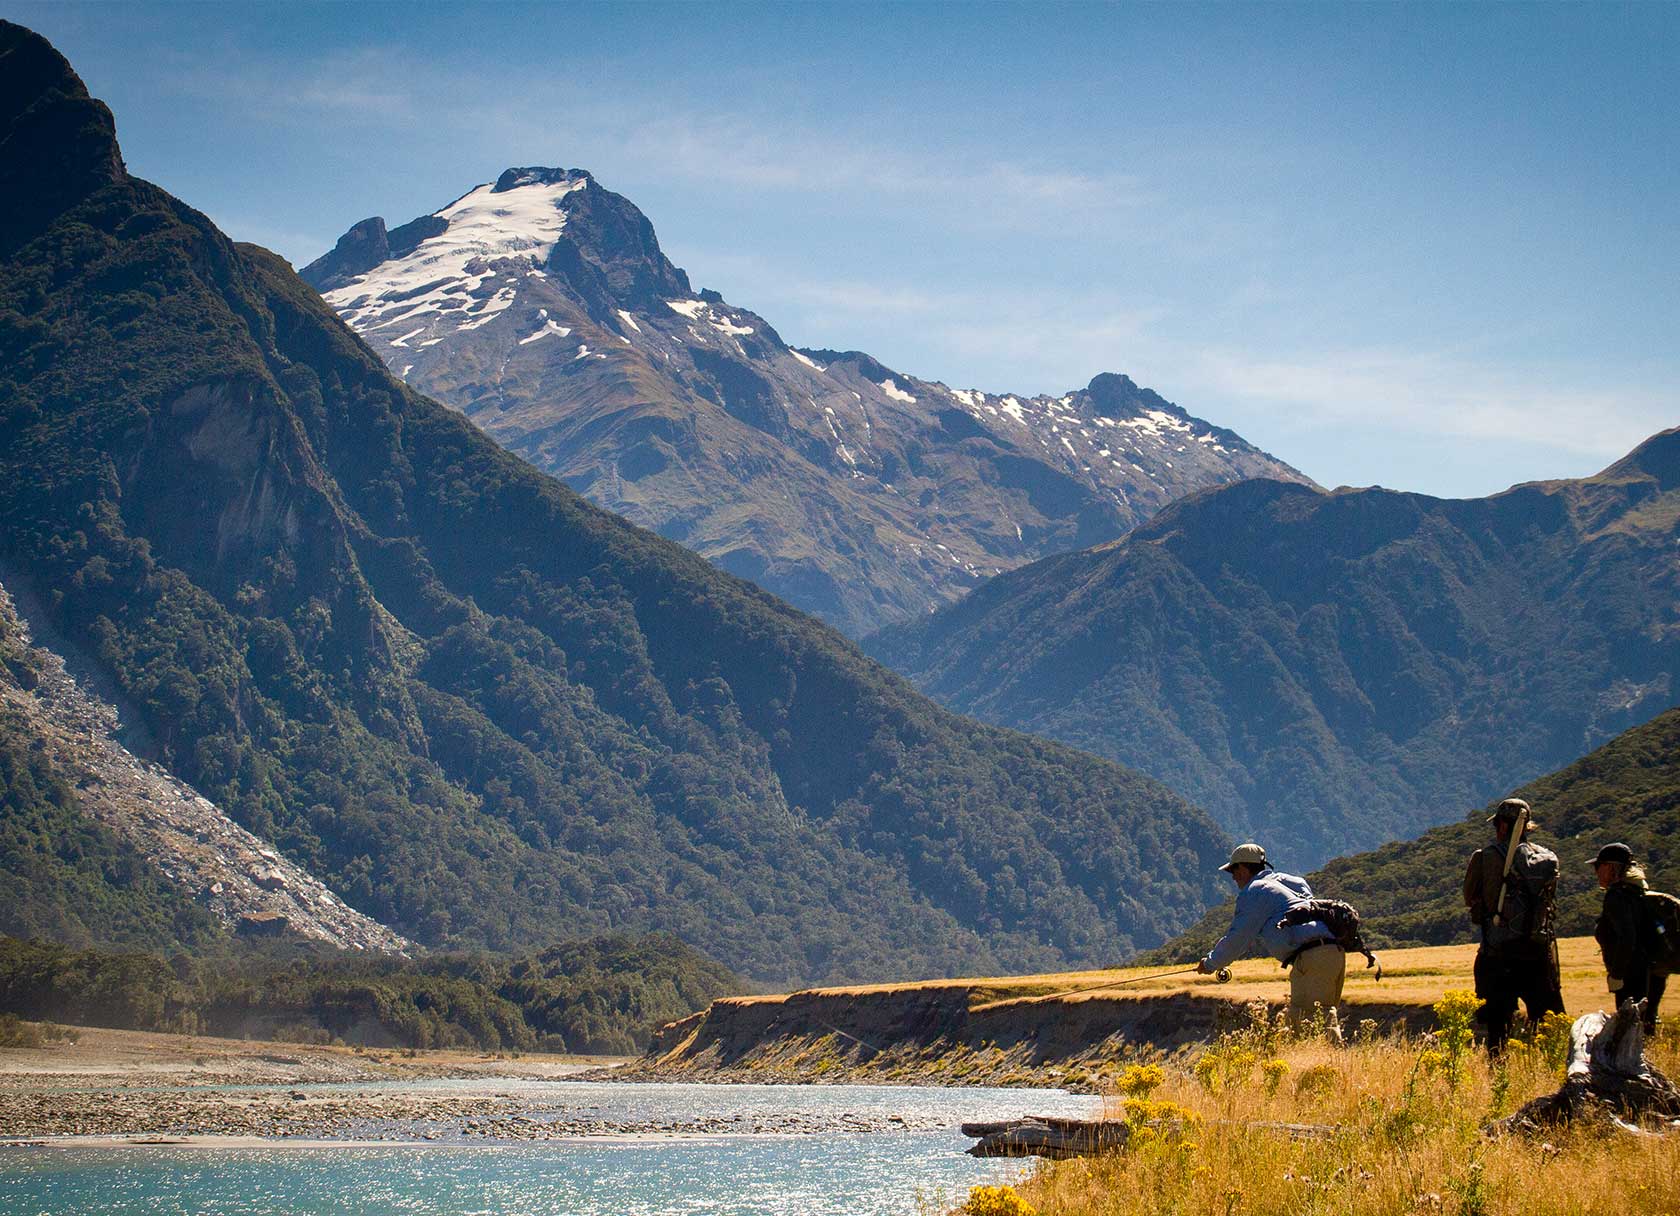 Travel to New Zealand: When It's Reopening and Why To Go